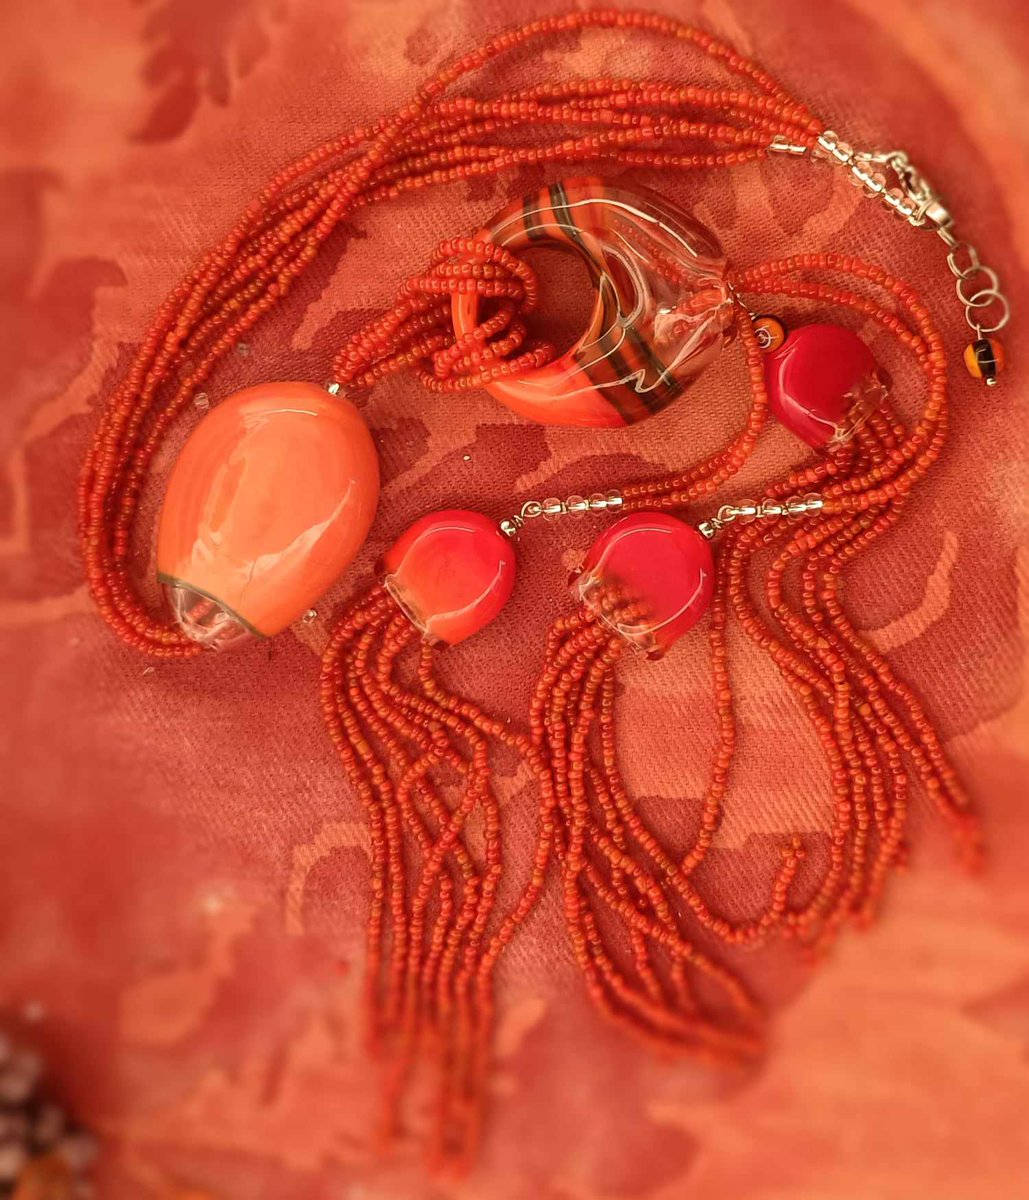 'Coral Eclipse', one of the collector's pieces created around the blown art pieces by Alessia Fuga for the ABC a bead change capsule presented during The Venice Glass Week

#marisaconvento #venetiandreams #alessiafuga #glassbeads #perleinvetro #necklace #collana